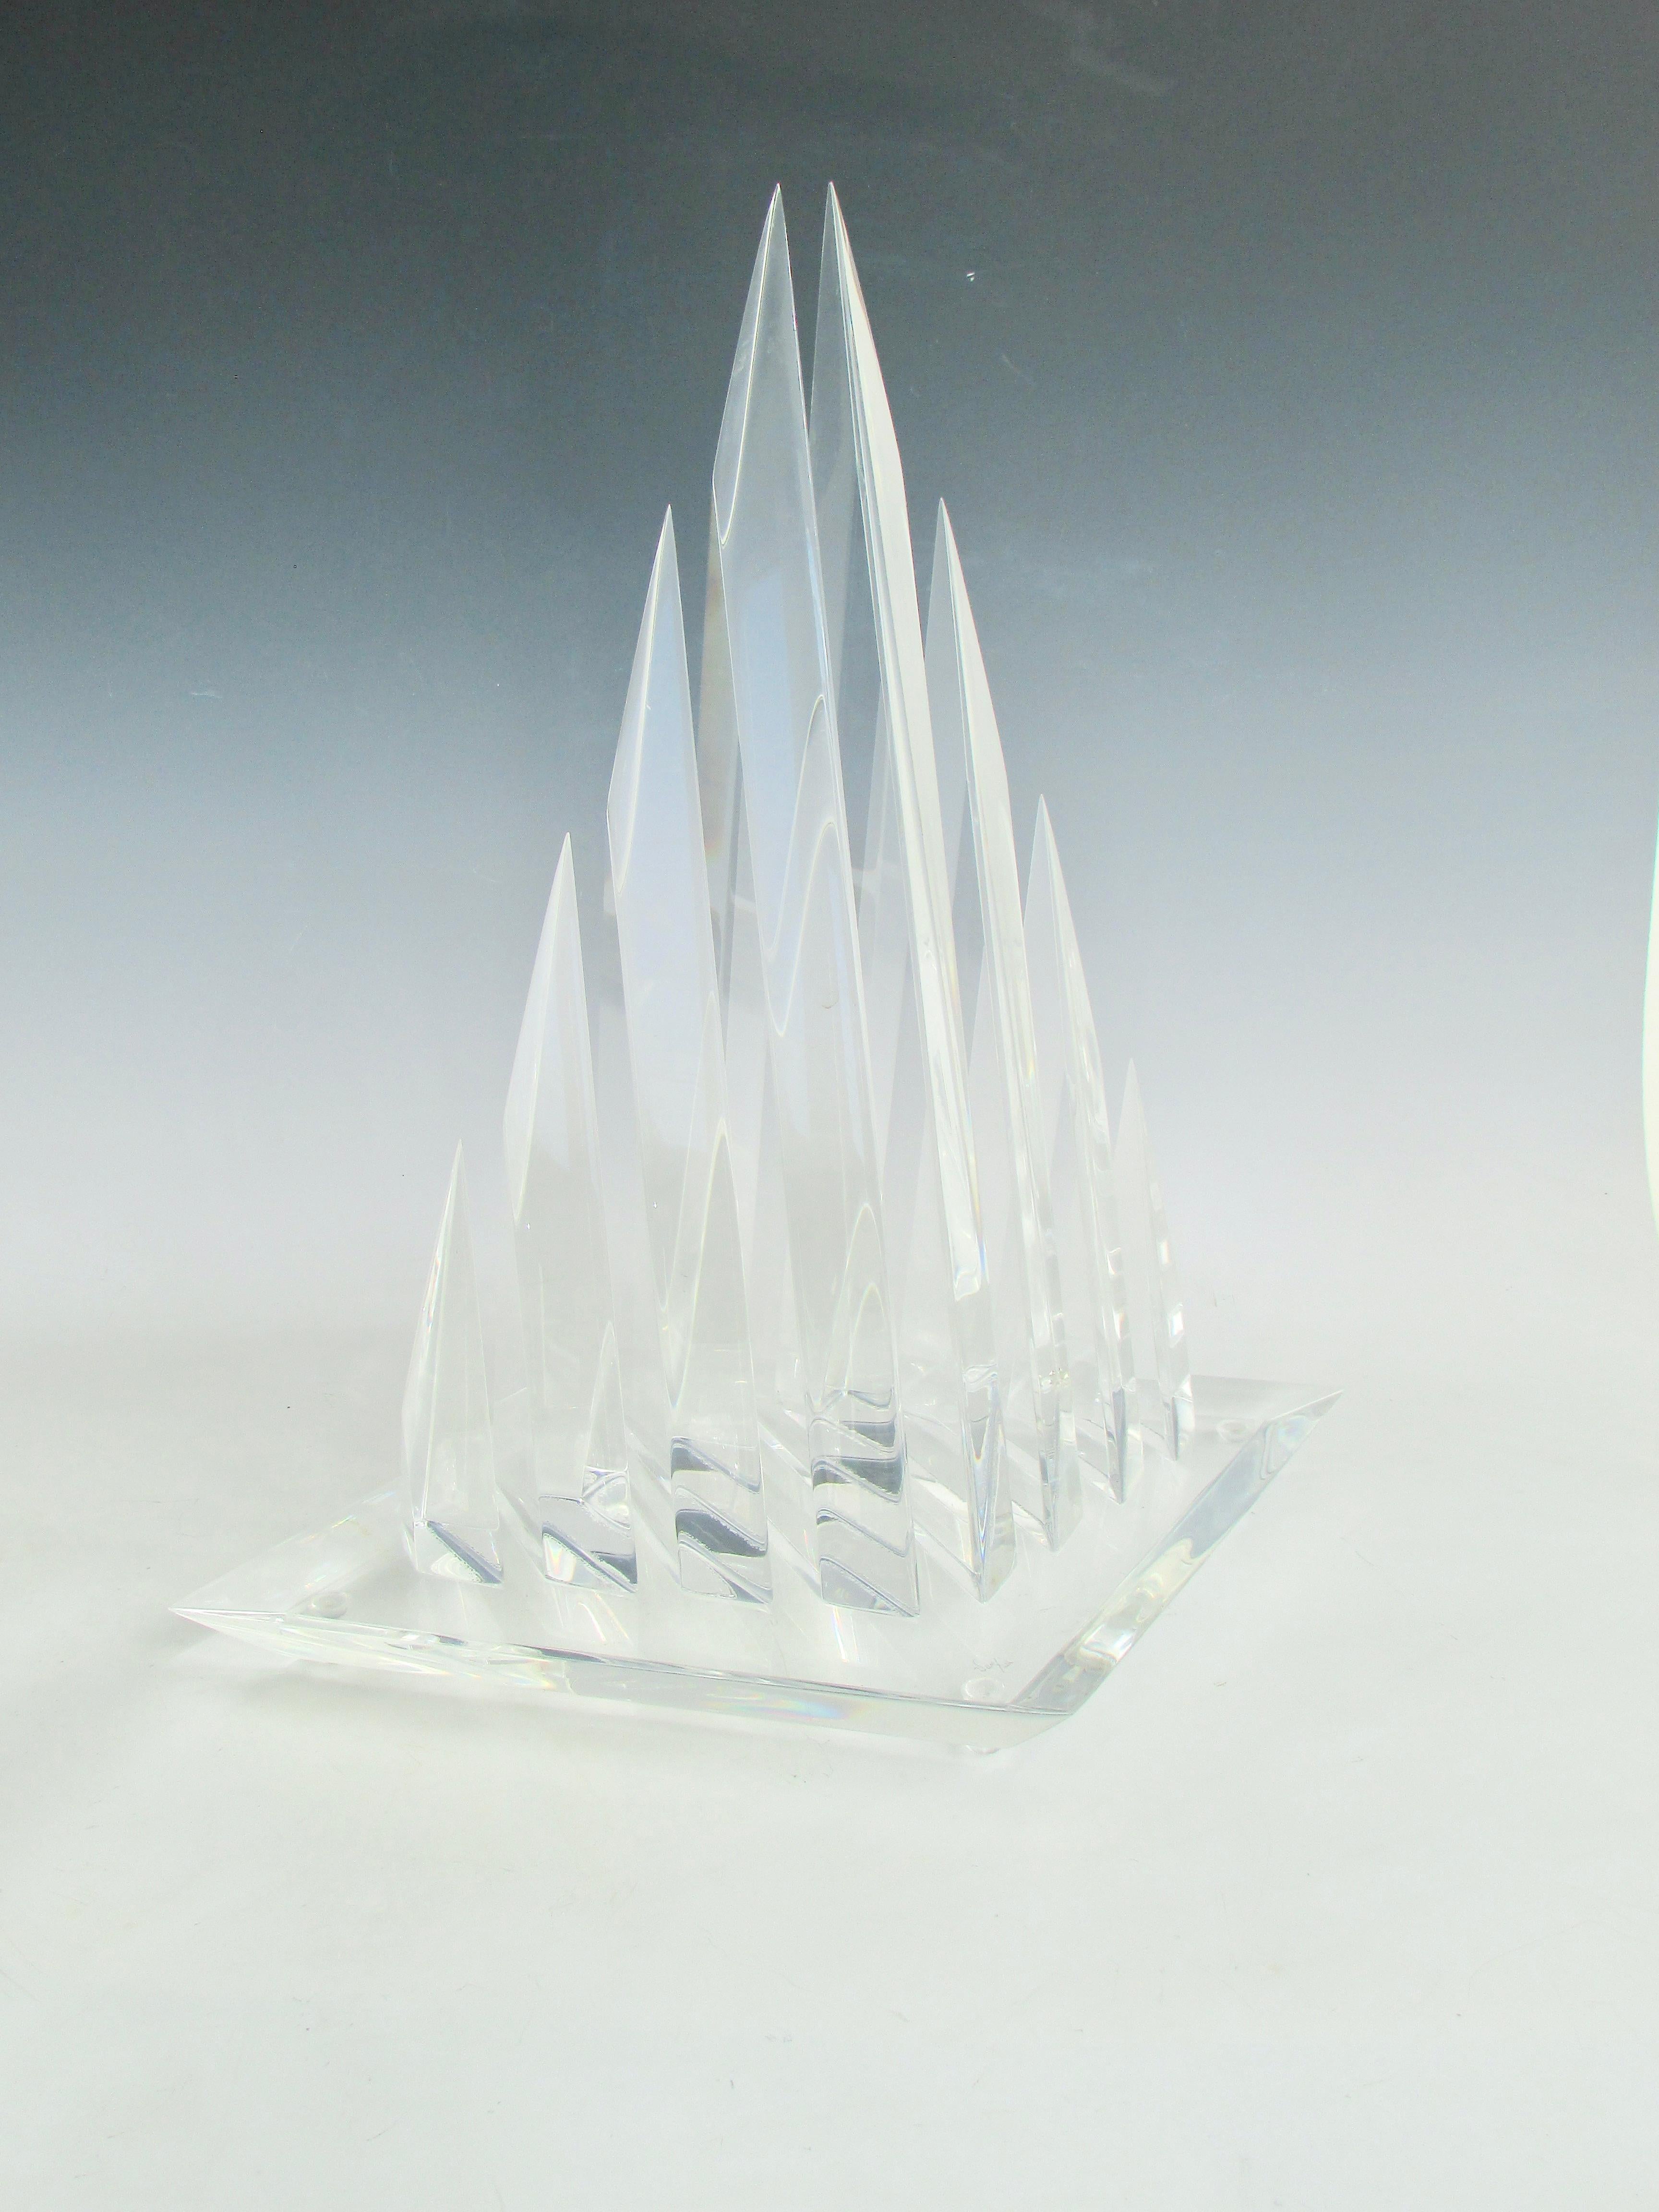 Polished Hivo Van Teal Segmented Lucite Pyramid, Triangle Sculpture